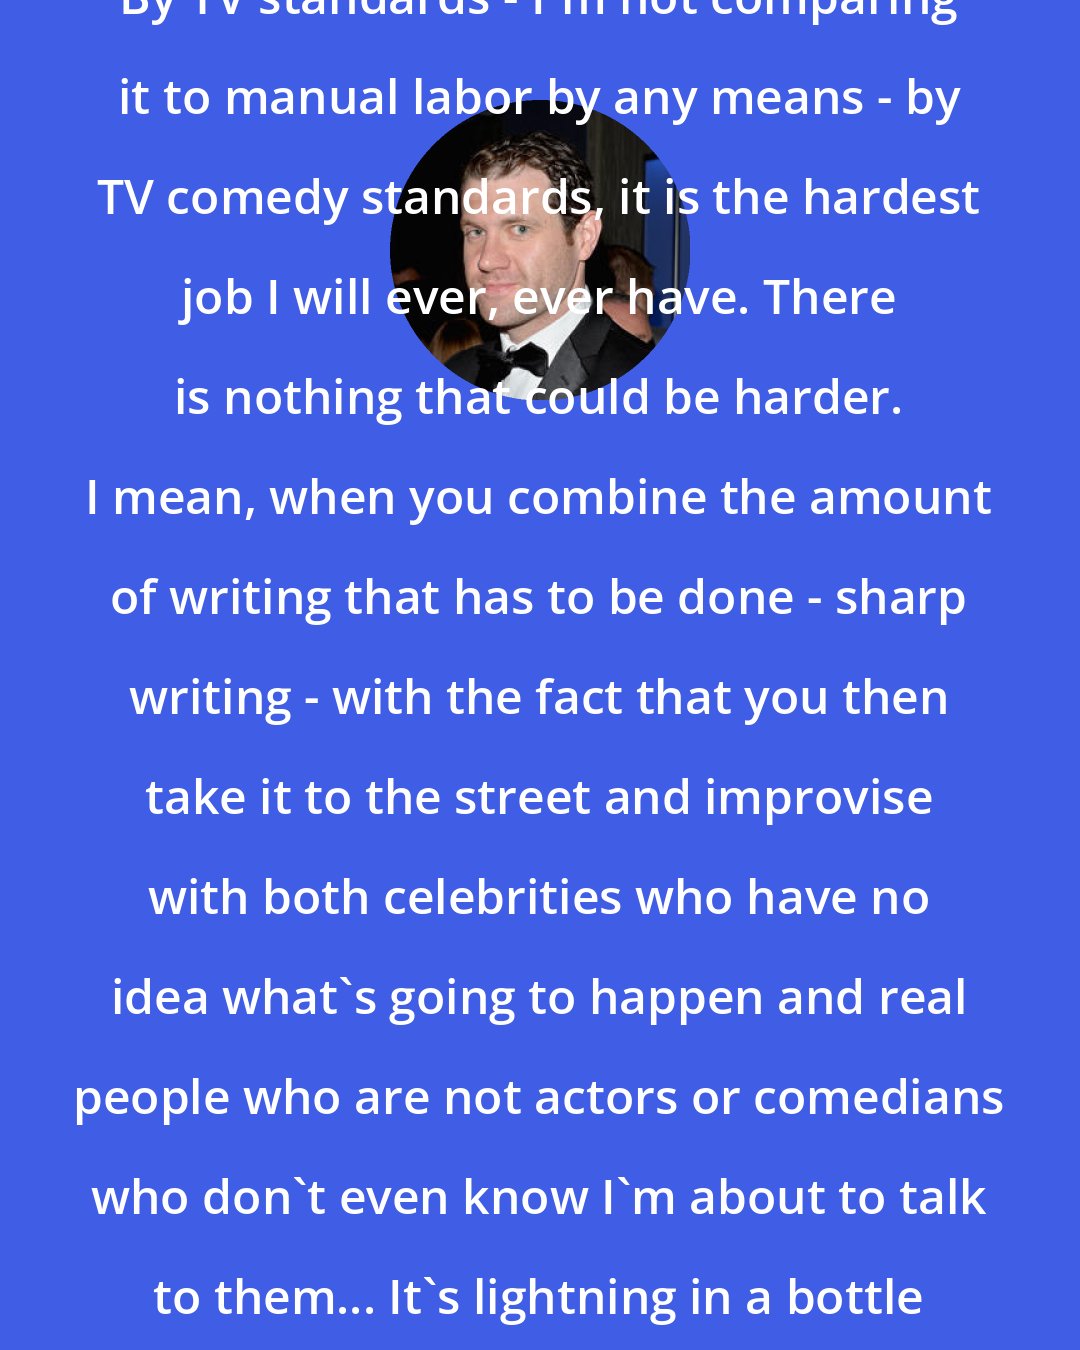 Billy Eichner: By TV standards - I'm not comparing it to manual labor by any means - by TV comedy standards, it is the hardest job I will ever, ever have. There is nothing that could be harder. I mean, when you combine the amount of writing that has to be done - sharp writing - with the fact that you then take it to the street and improvise with both celebrities who have no idea what's going to happen and real people who are not actors or comedians who don't even know I'm about to talk to them... It's lightning in a bottle every time.